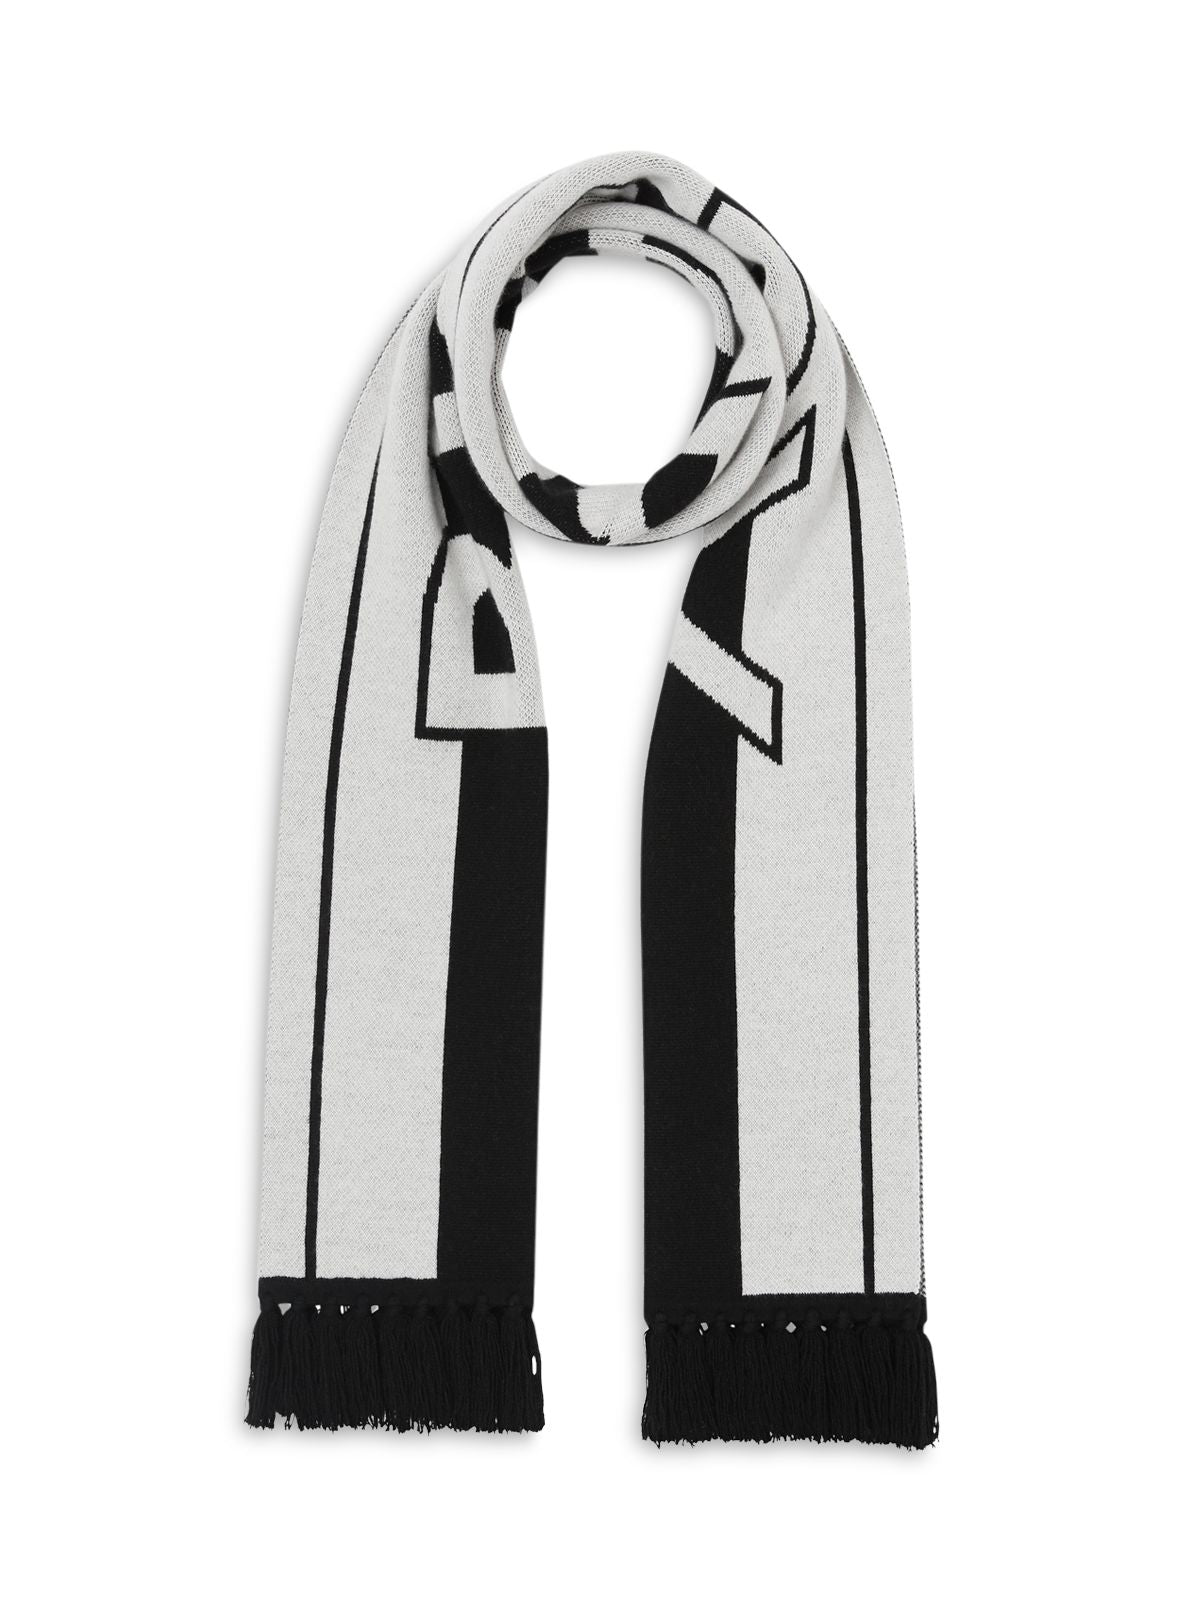 BURBERRY Womens White Cotton Knit Fringed Cashmere Neckwarmer Scarf